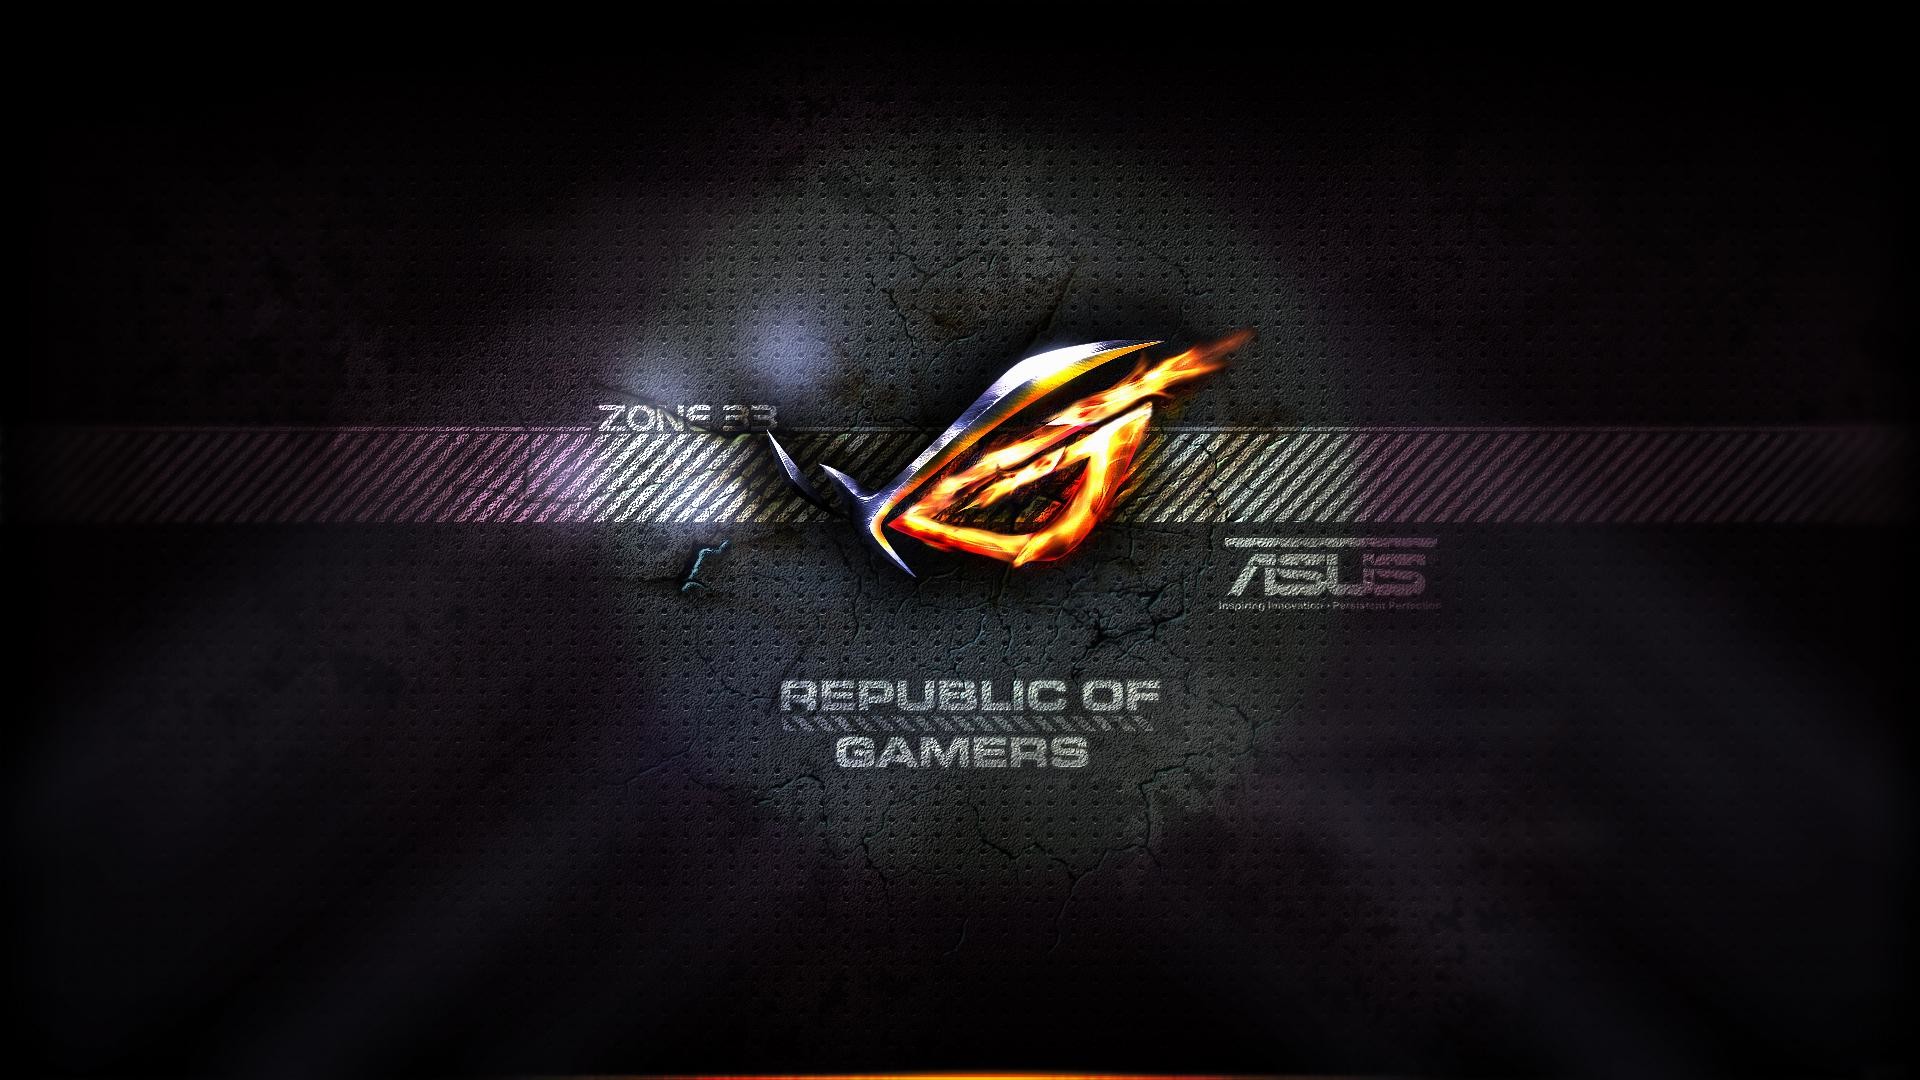 wallpaper.wiki-Pictures-Asus-Rog-PIC-WPC0011076